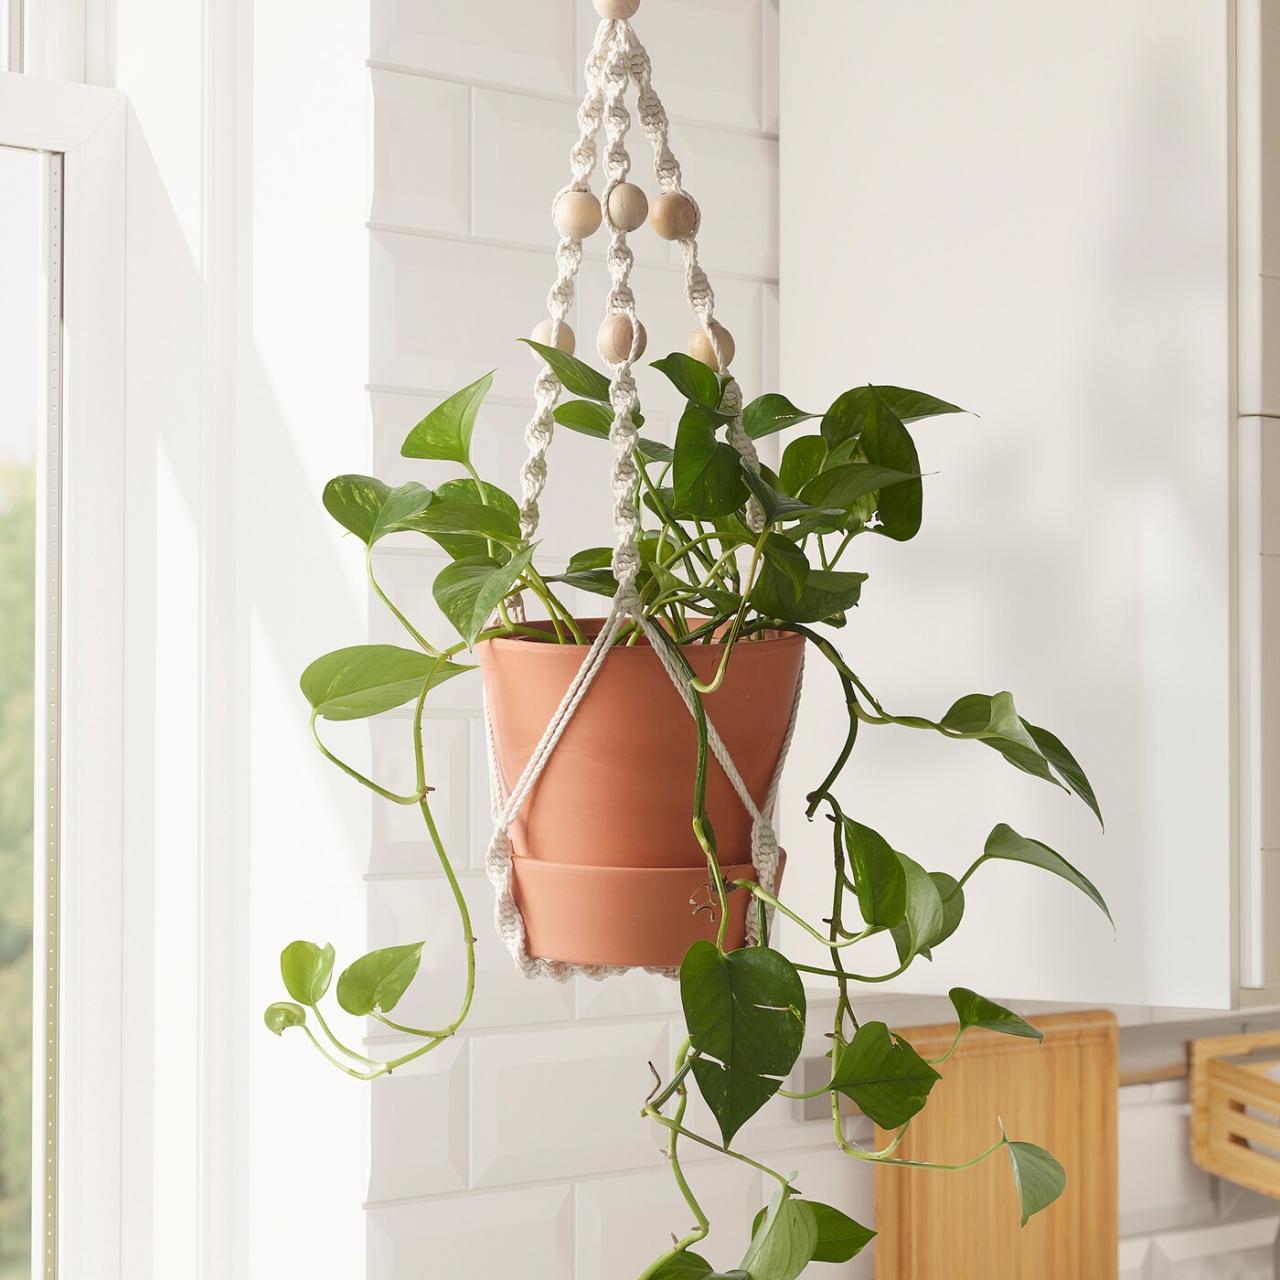 Hanging Plants Indoor | Explore Bunnings Hanging Plant Holders: Types, Considerations, and Creative Uses